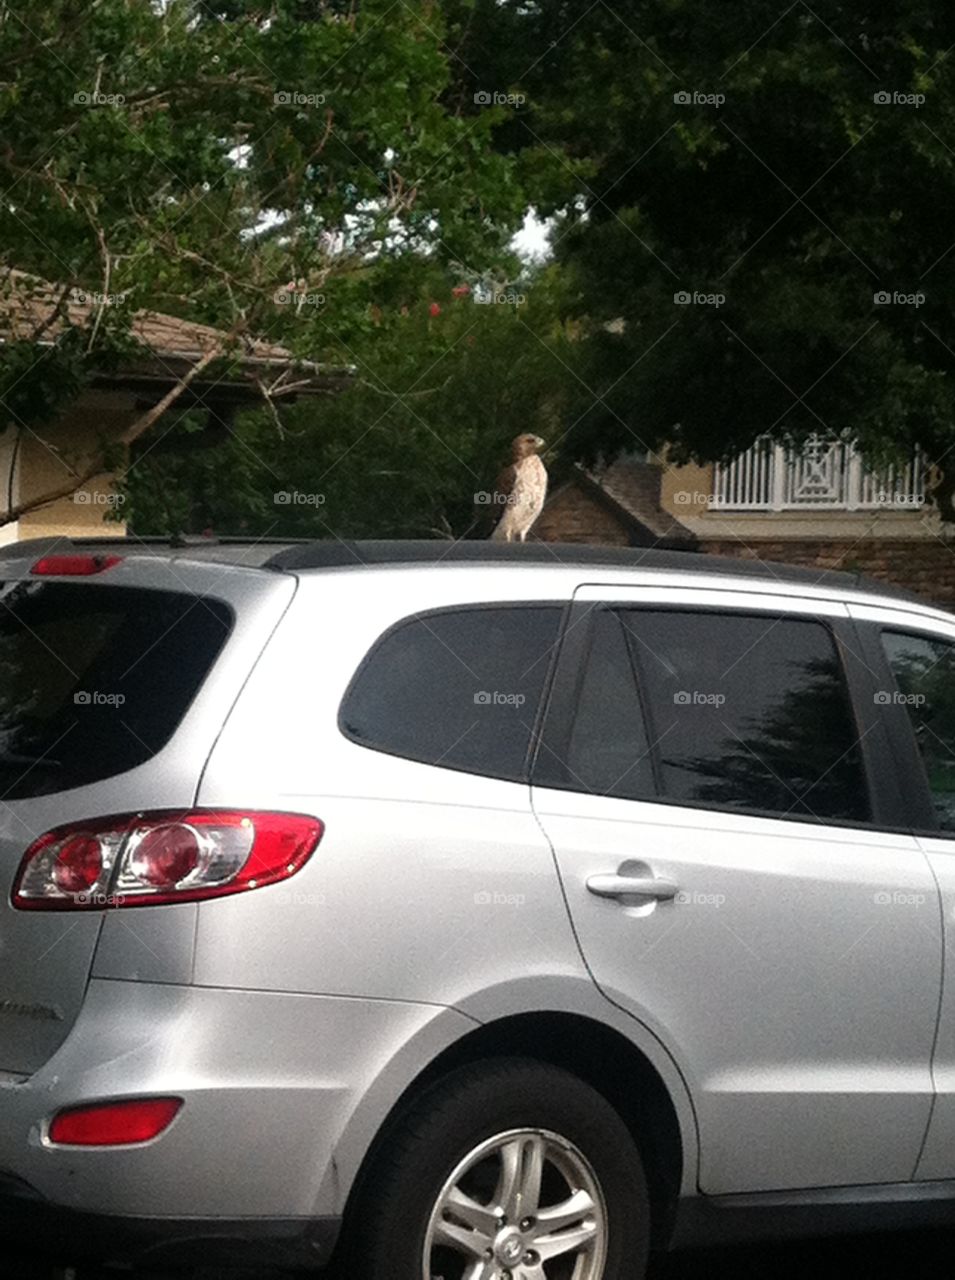 Hawk on a van . Hawk watching out over the parking lot 